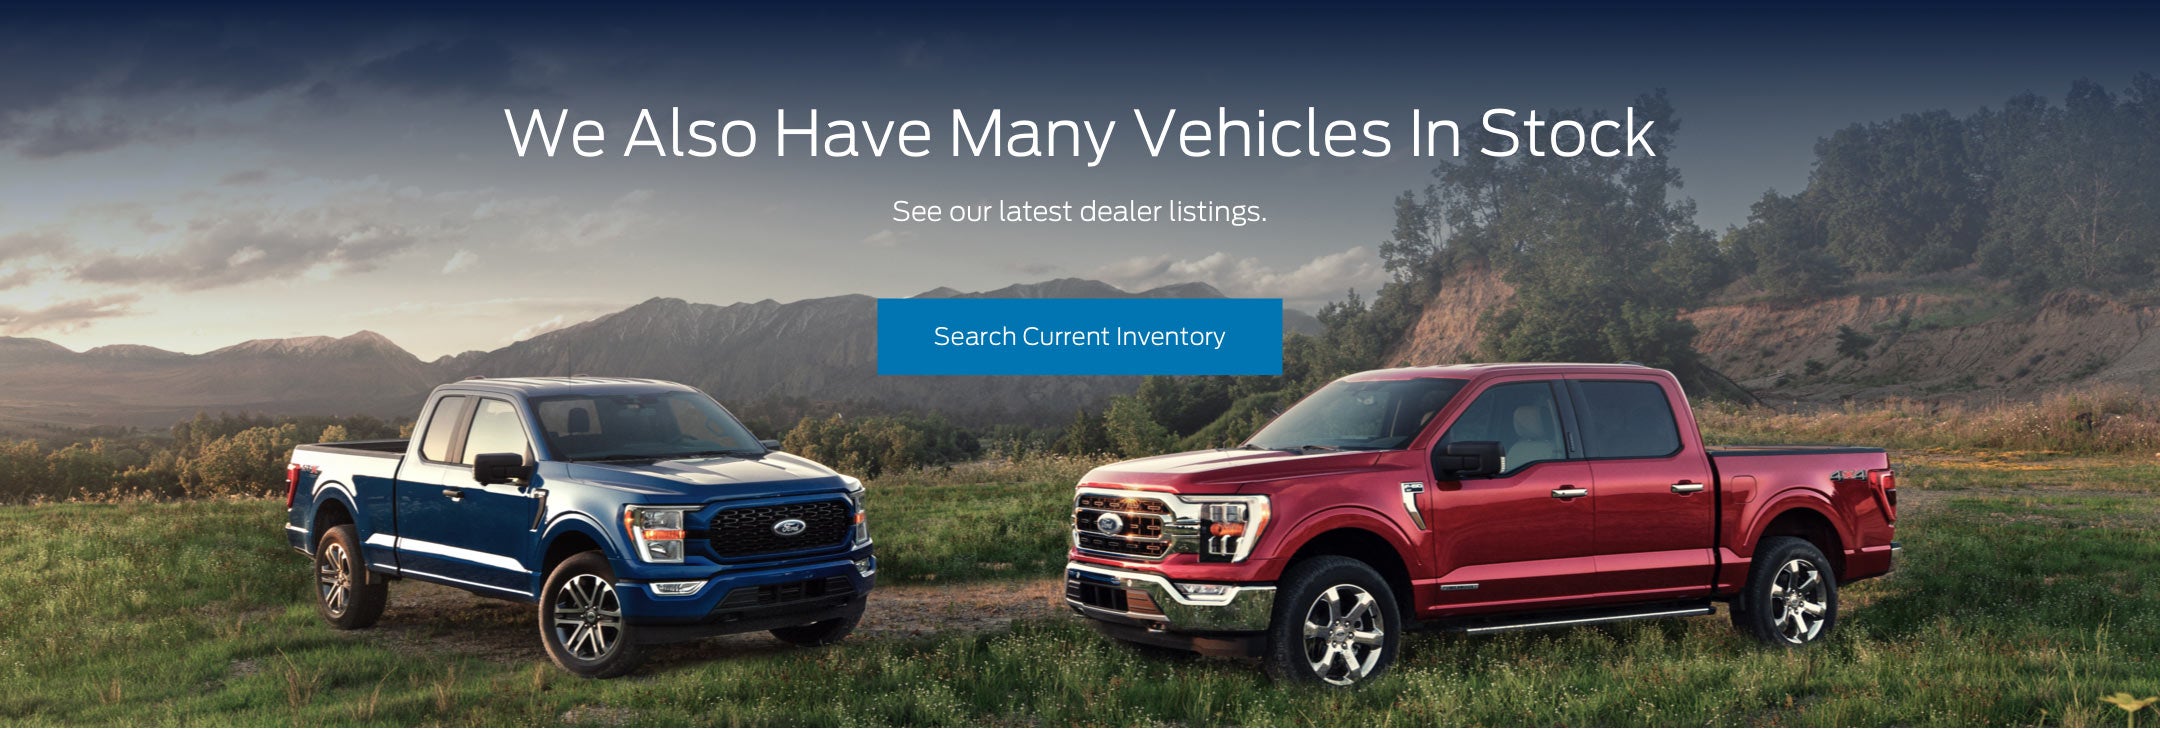 Ford vehicles in stock | Fremont Ford Cody in Cody WY